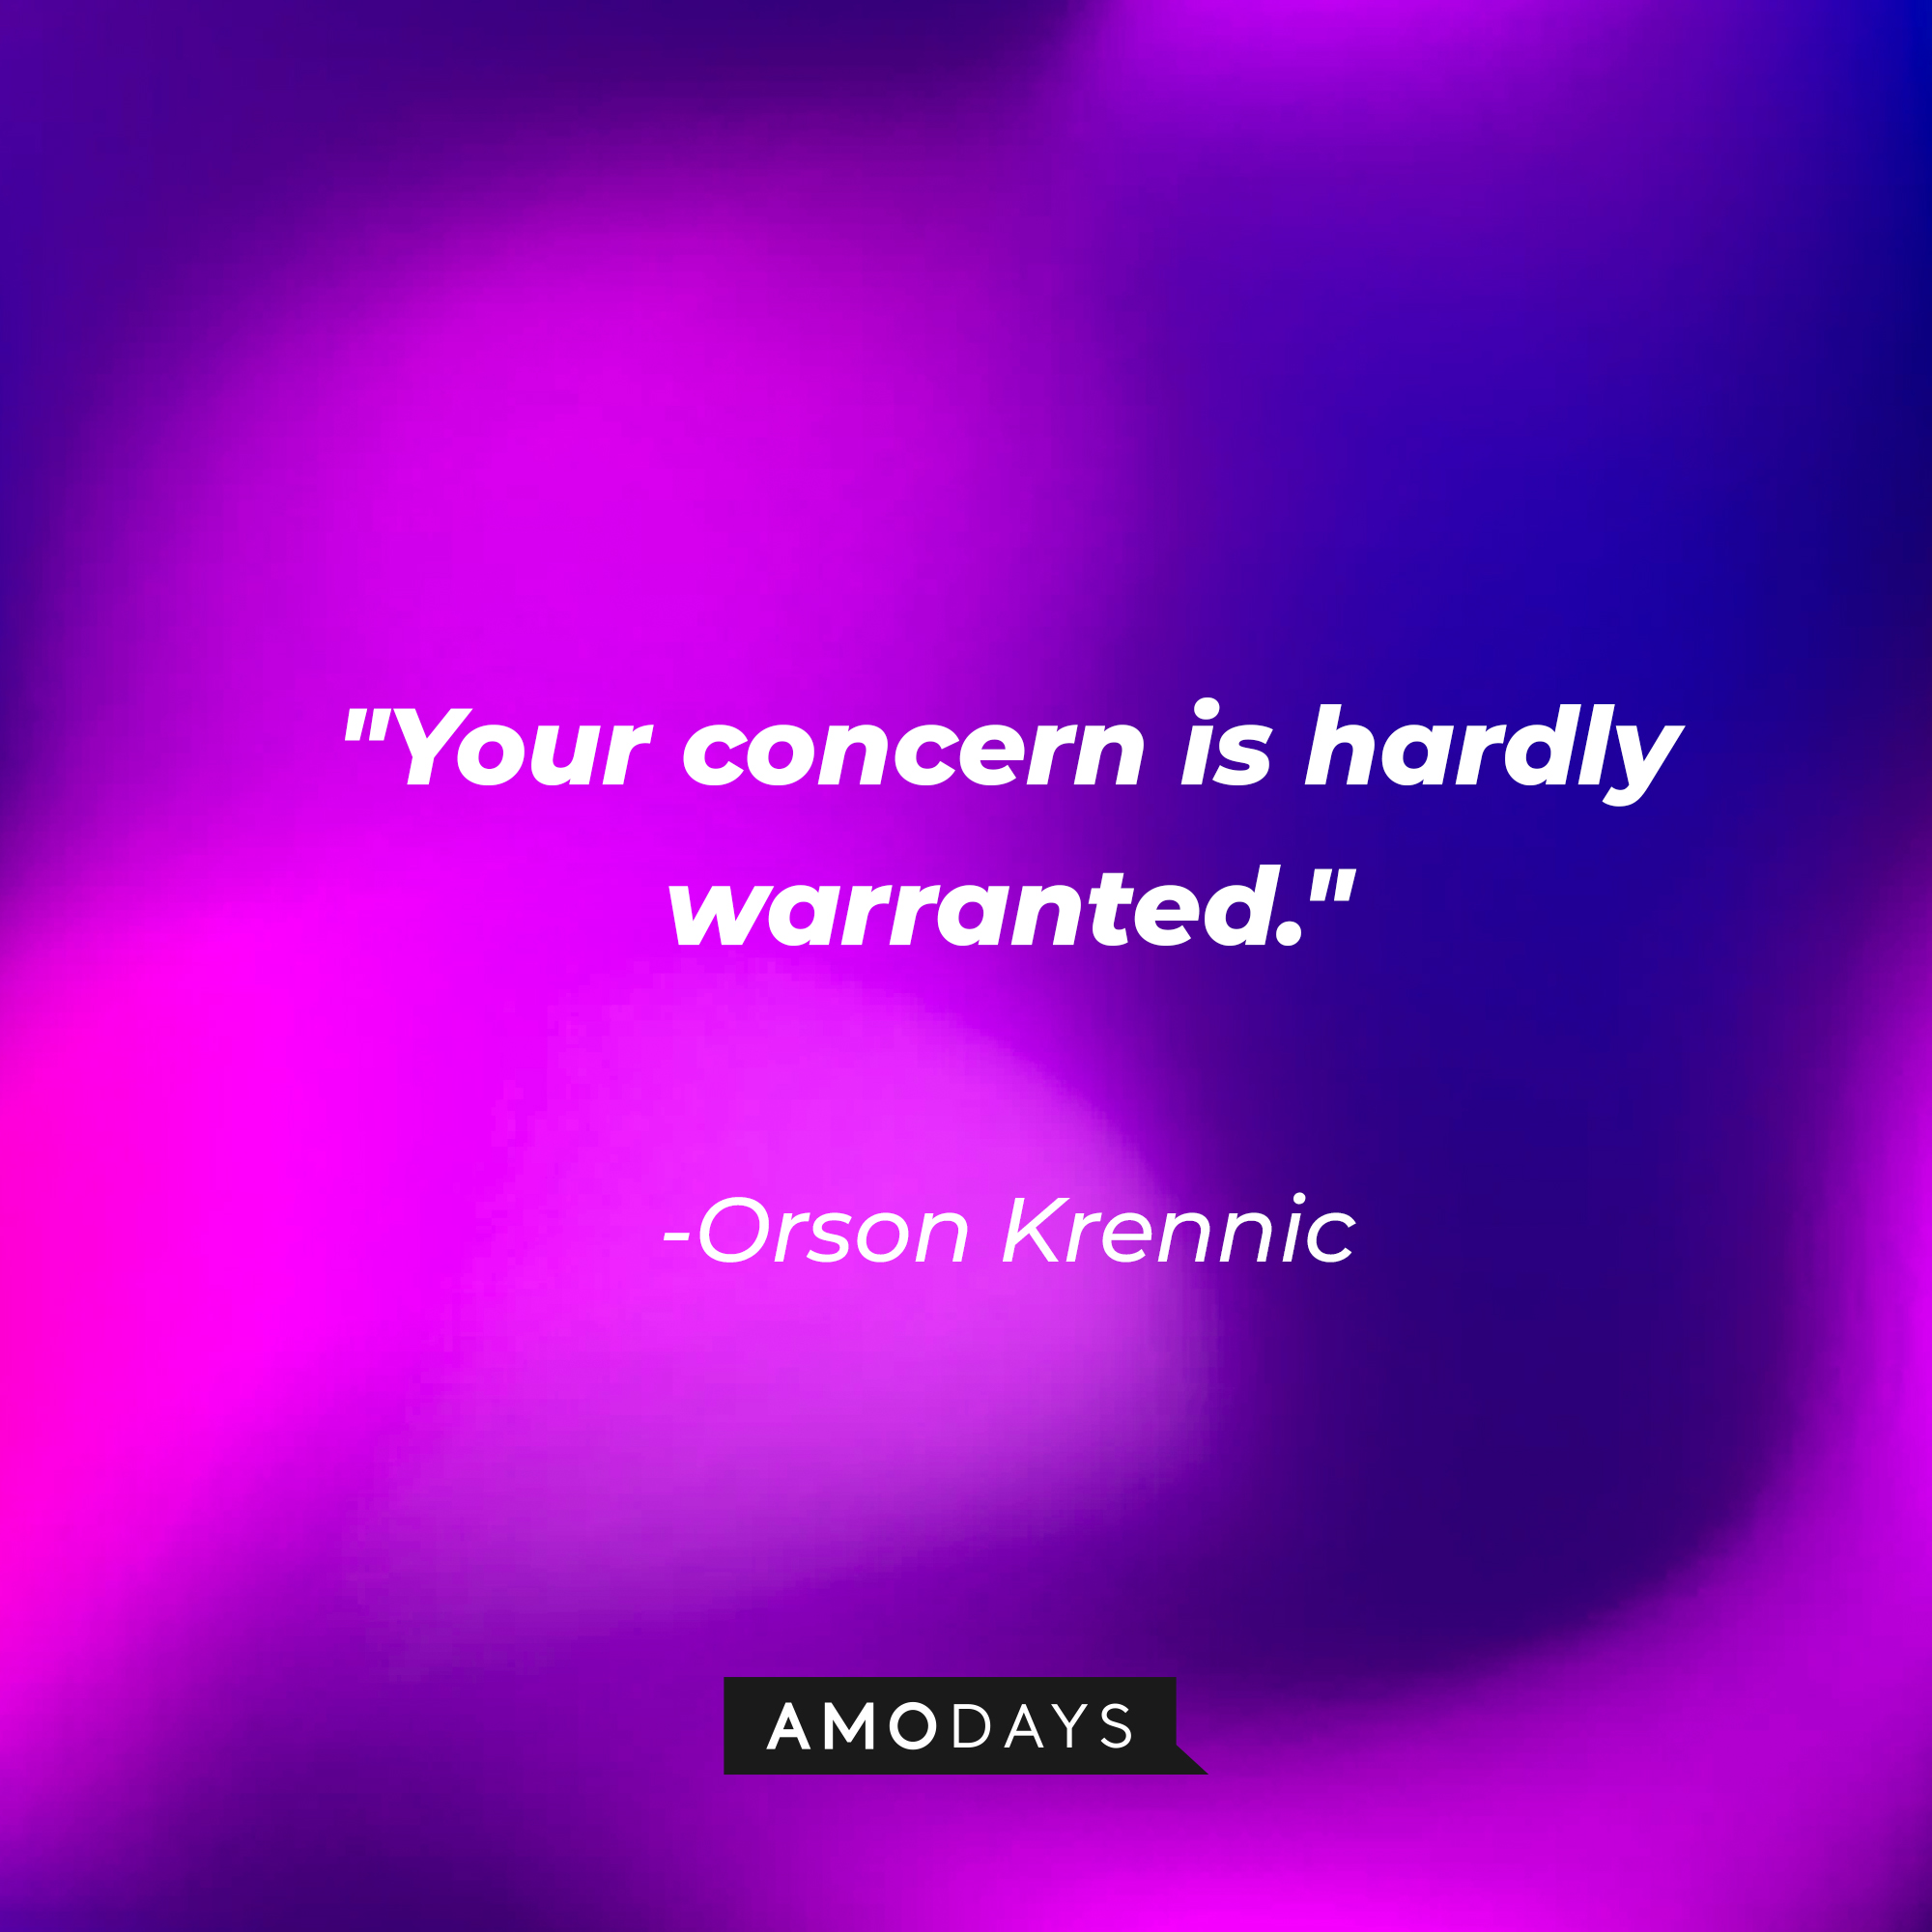 Orson Krennic's quote: “Your concern is hardly warranted.” | Source: Amodays